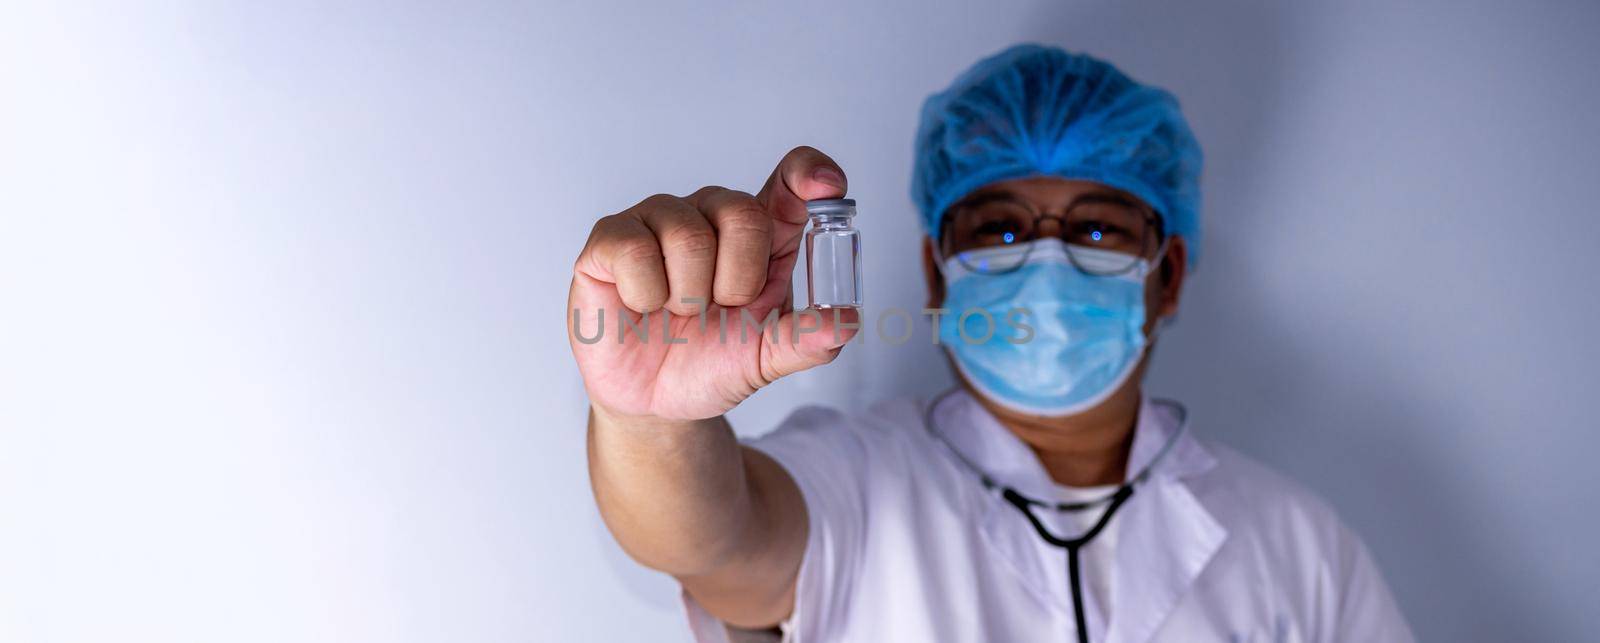 Portrait of a doctor wearing a mask and wearing a hat Stand holding an empty vaccine or pill bottle.Medical concept and treatment.